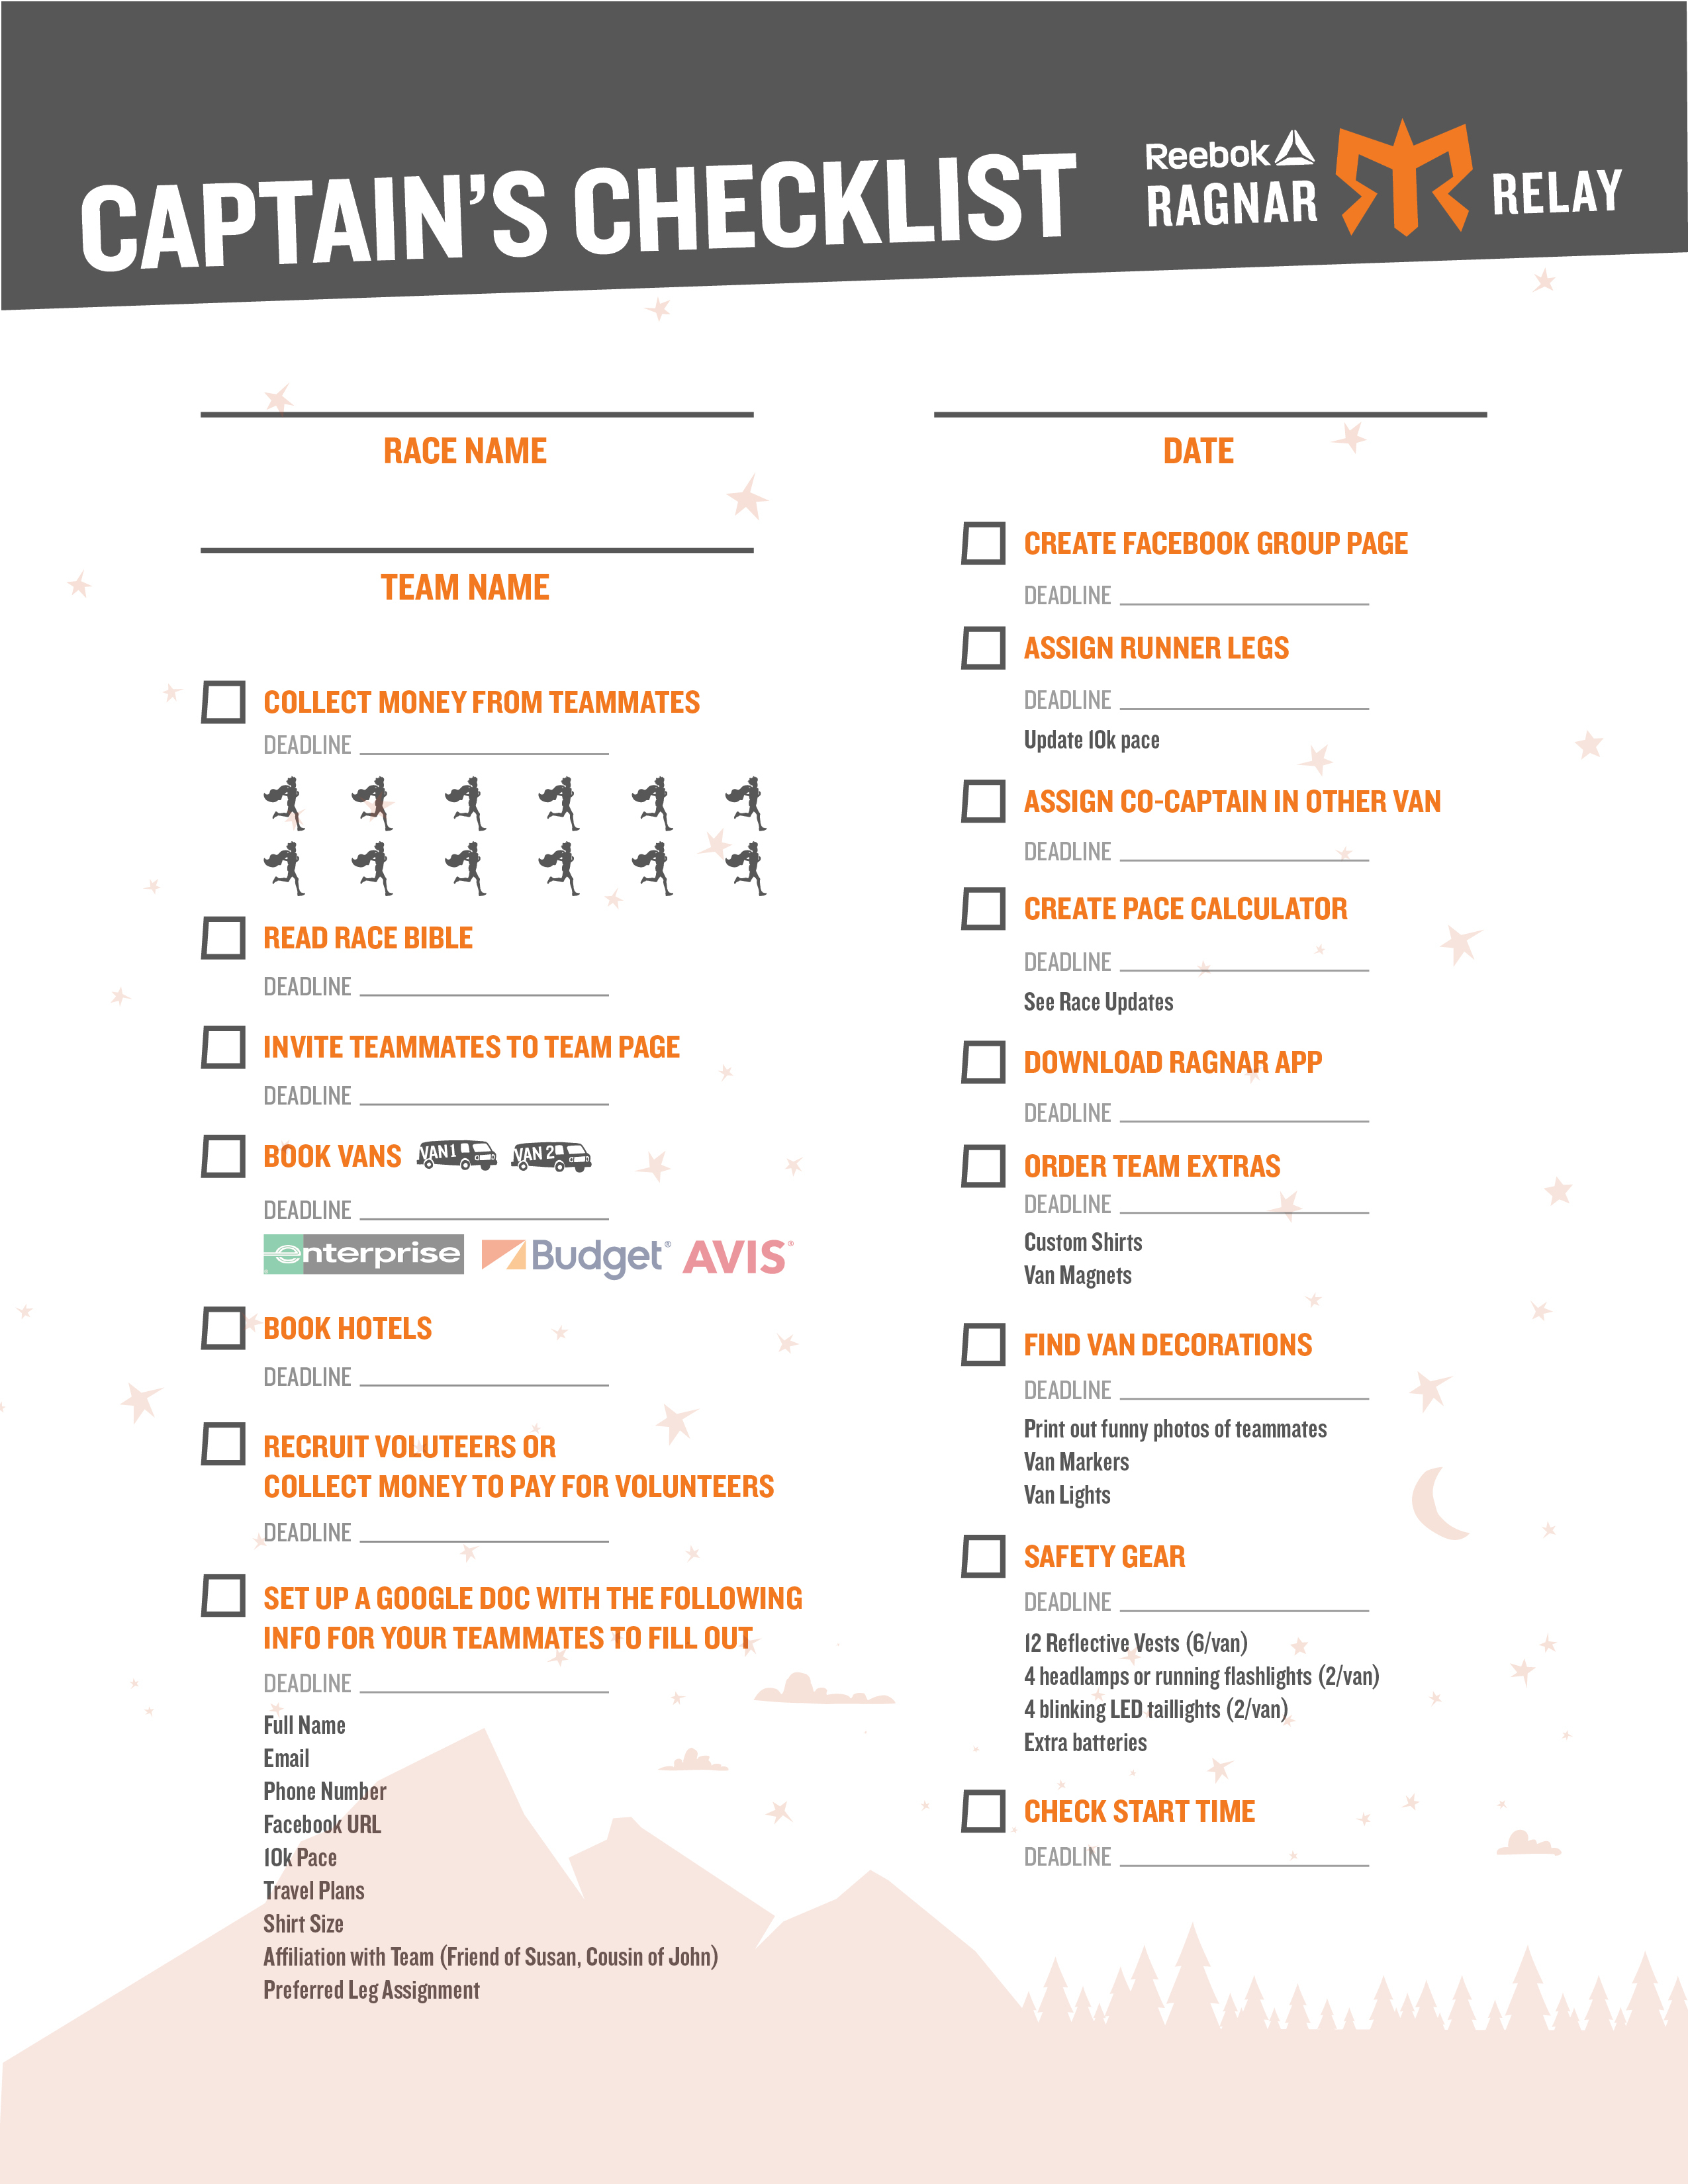 Race Night Spreadsheet Intended For Stay Organized With The Ragnar Relay Captain's Checklist  Blognar